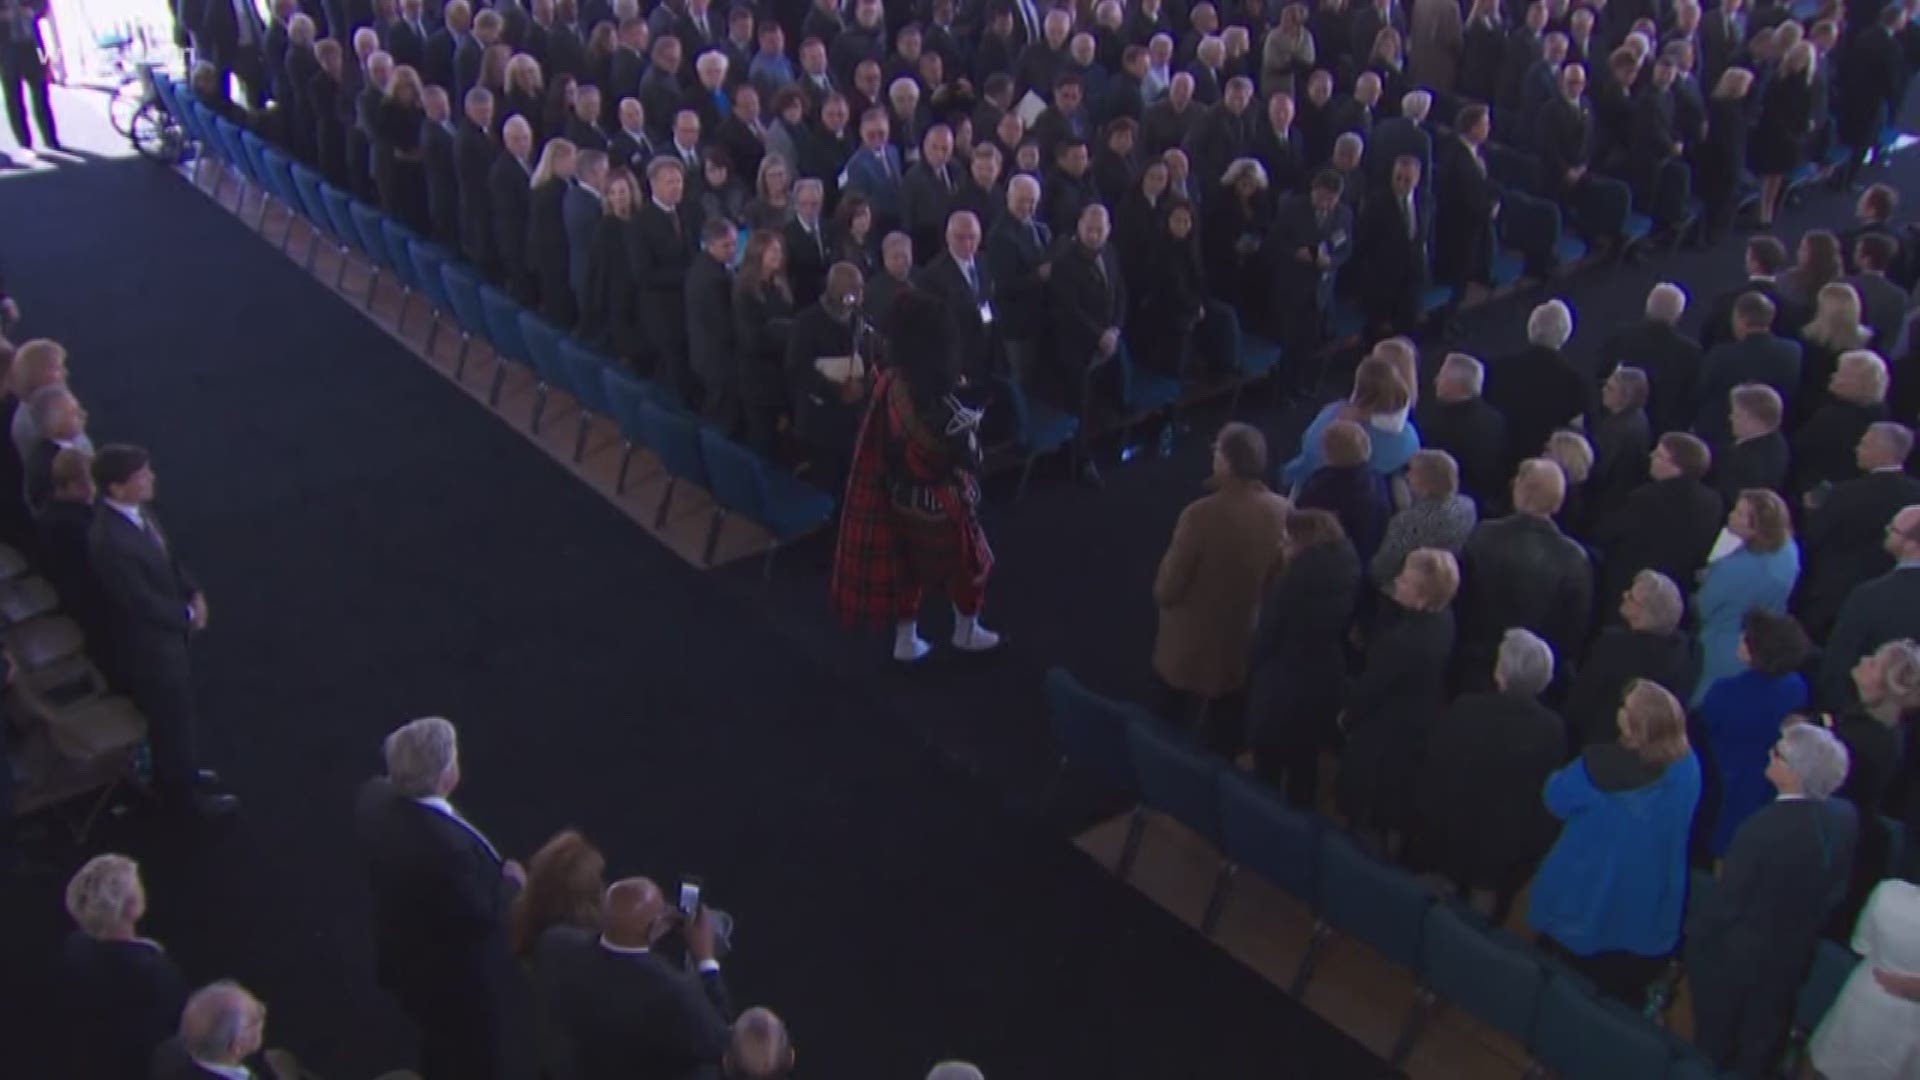 Rev. Billy Graham's casket is escorted with his family to the Prayer Garden where he will be buried next to his wife, Ruth.